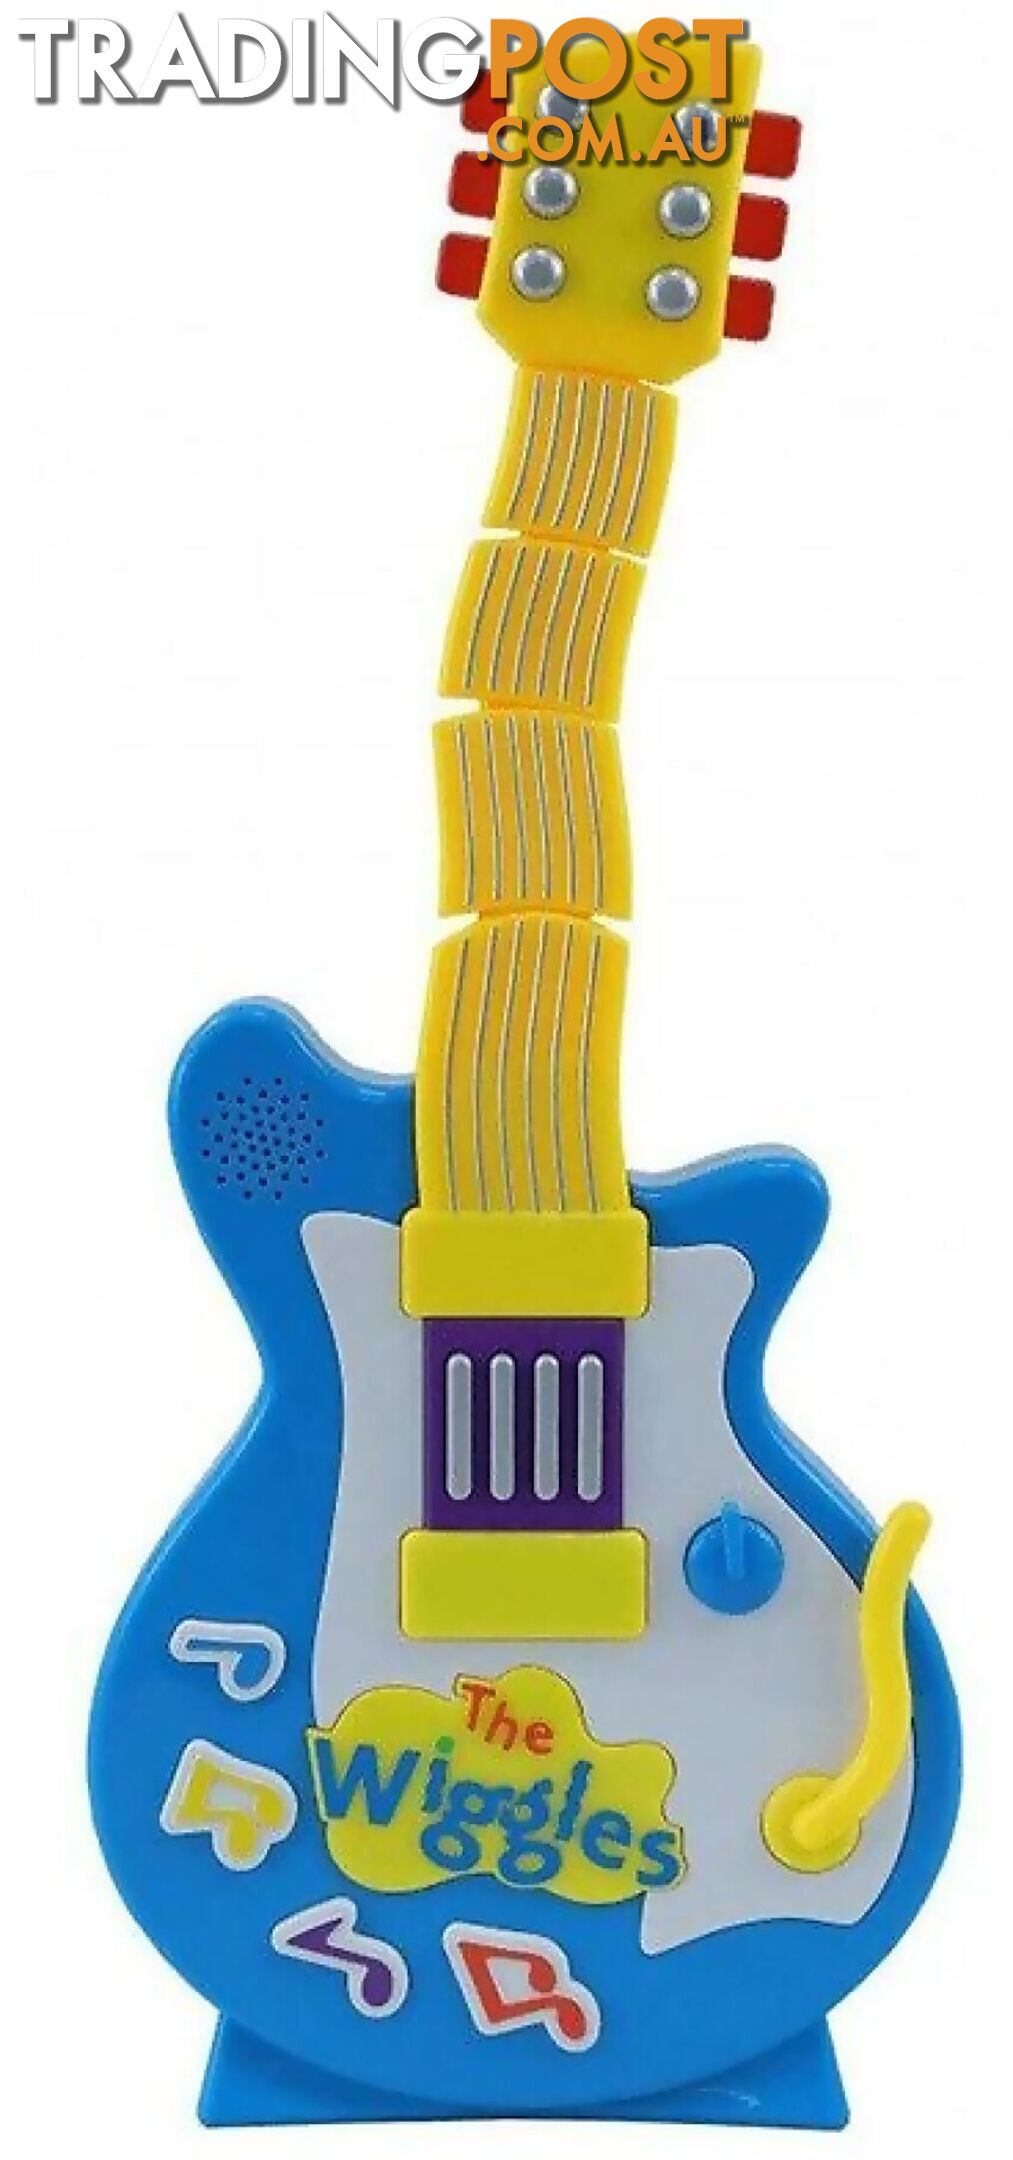 The Wiggles - Wiggly Guitar - Hs21762 - 840150217626